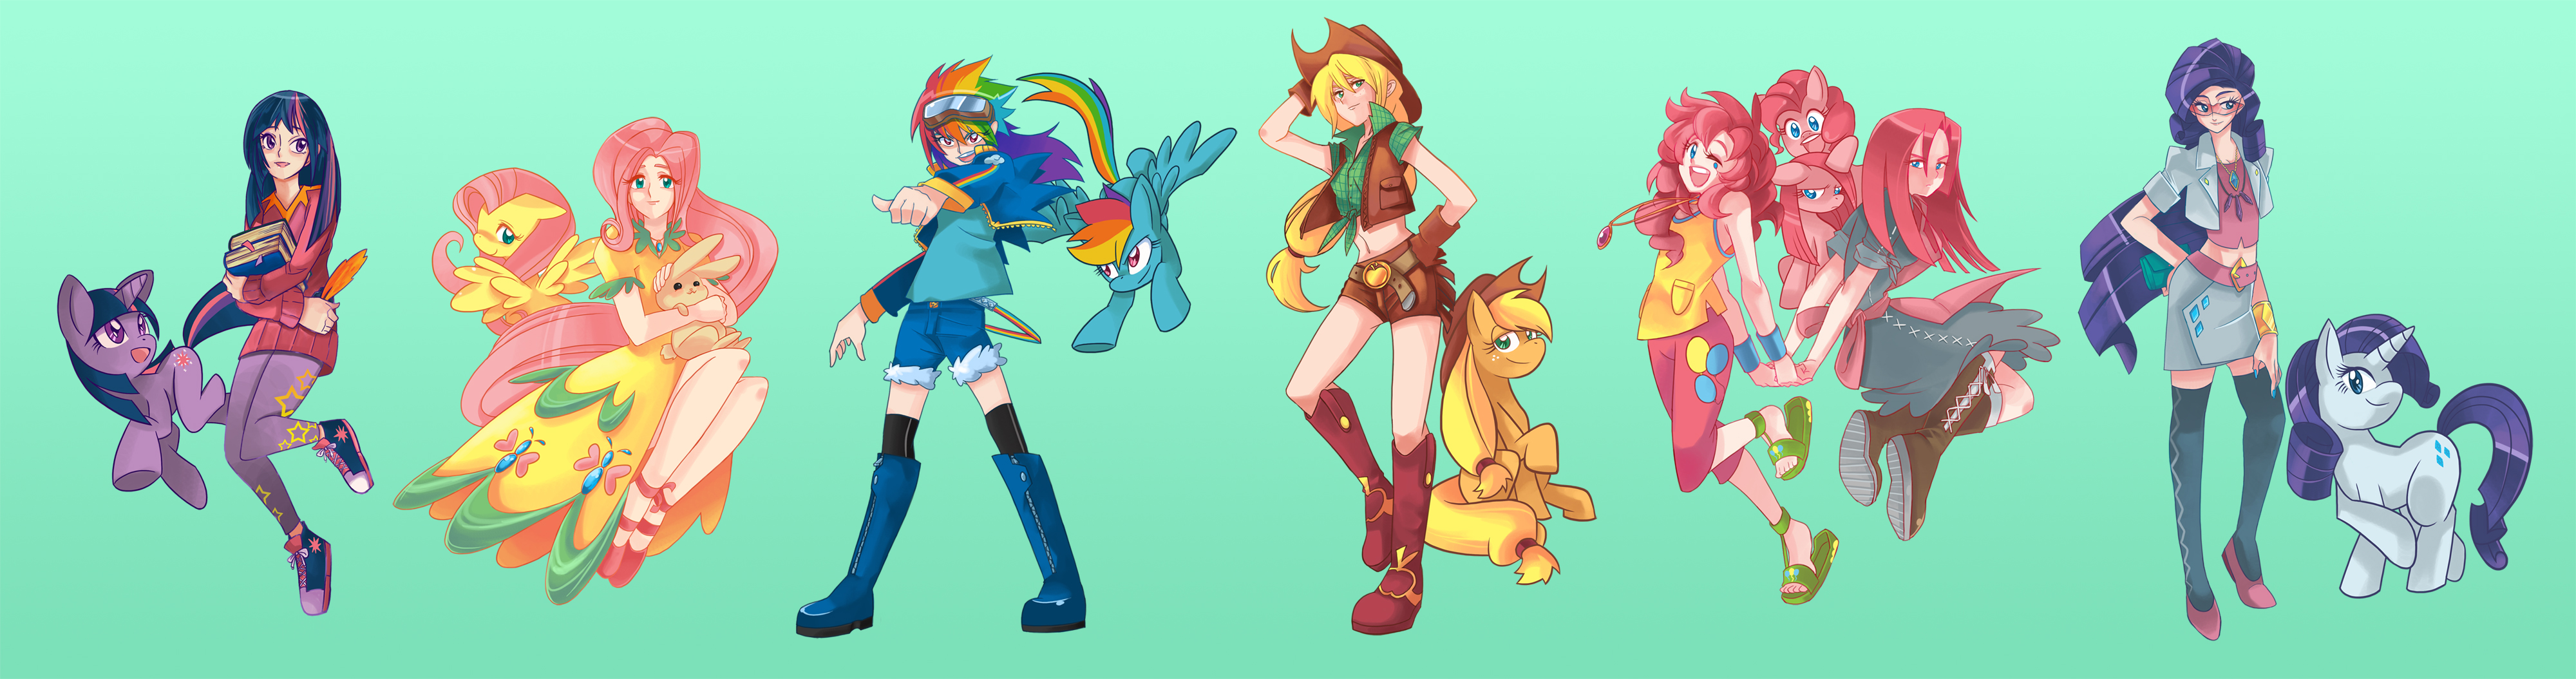 img-1473376-1-mlp_the_mane_6_by_sapphire